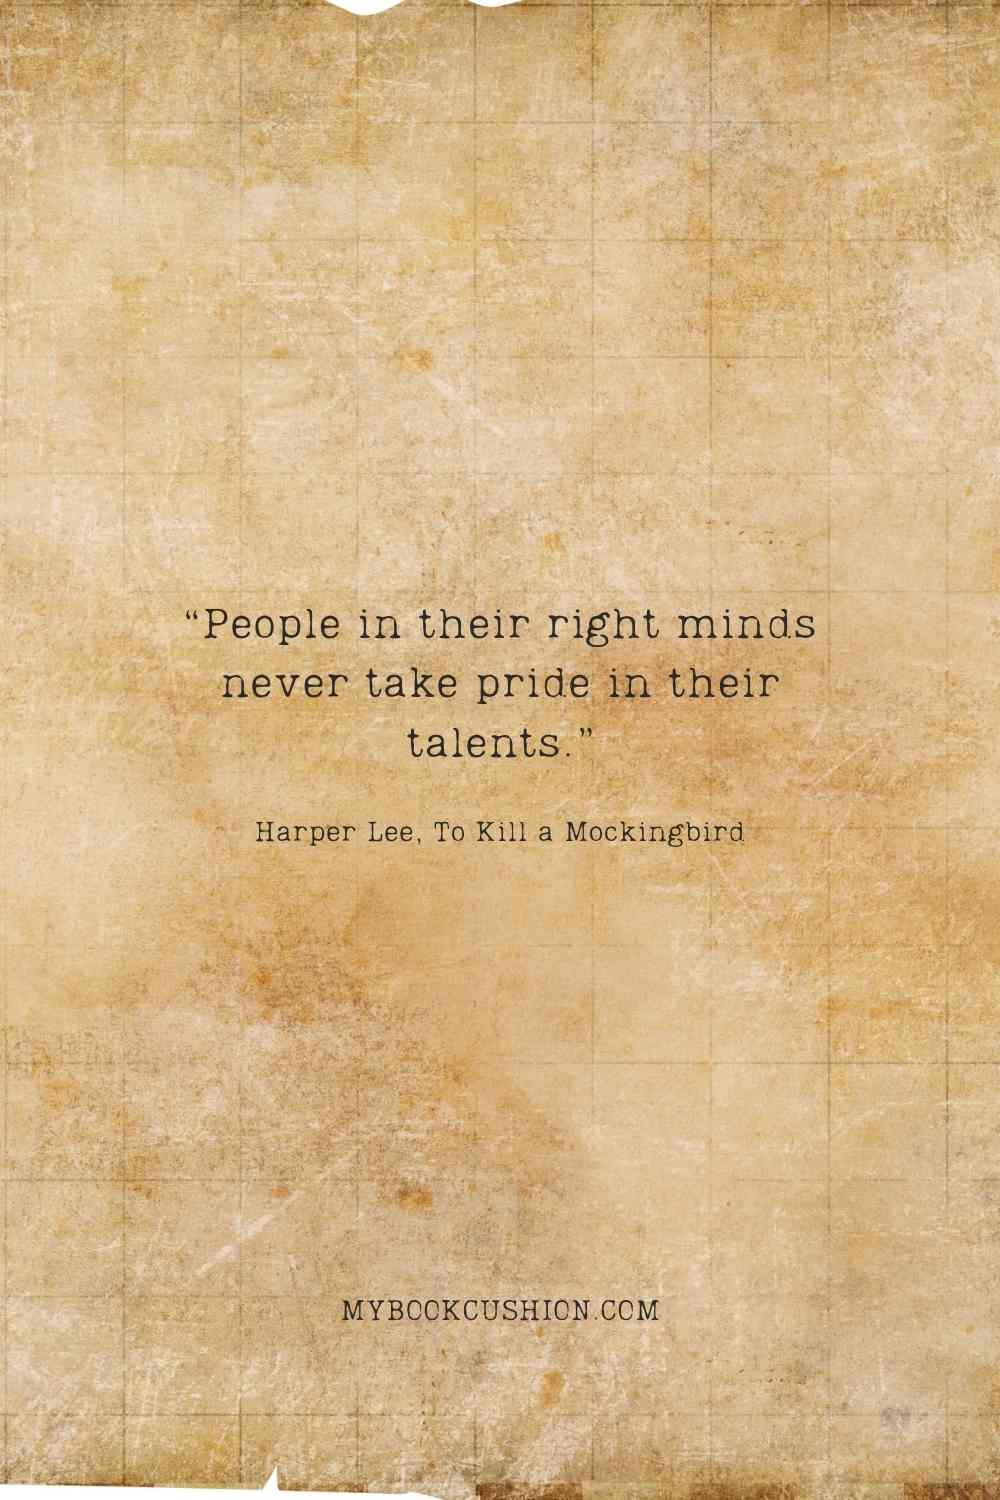 “People in their right minds never take pride in their talents.” – Harper Lee, To Kill a Mockingbird